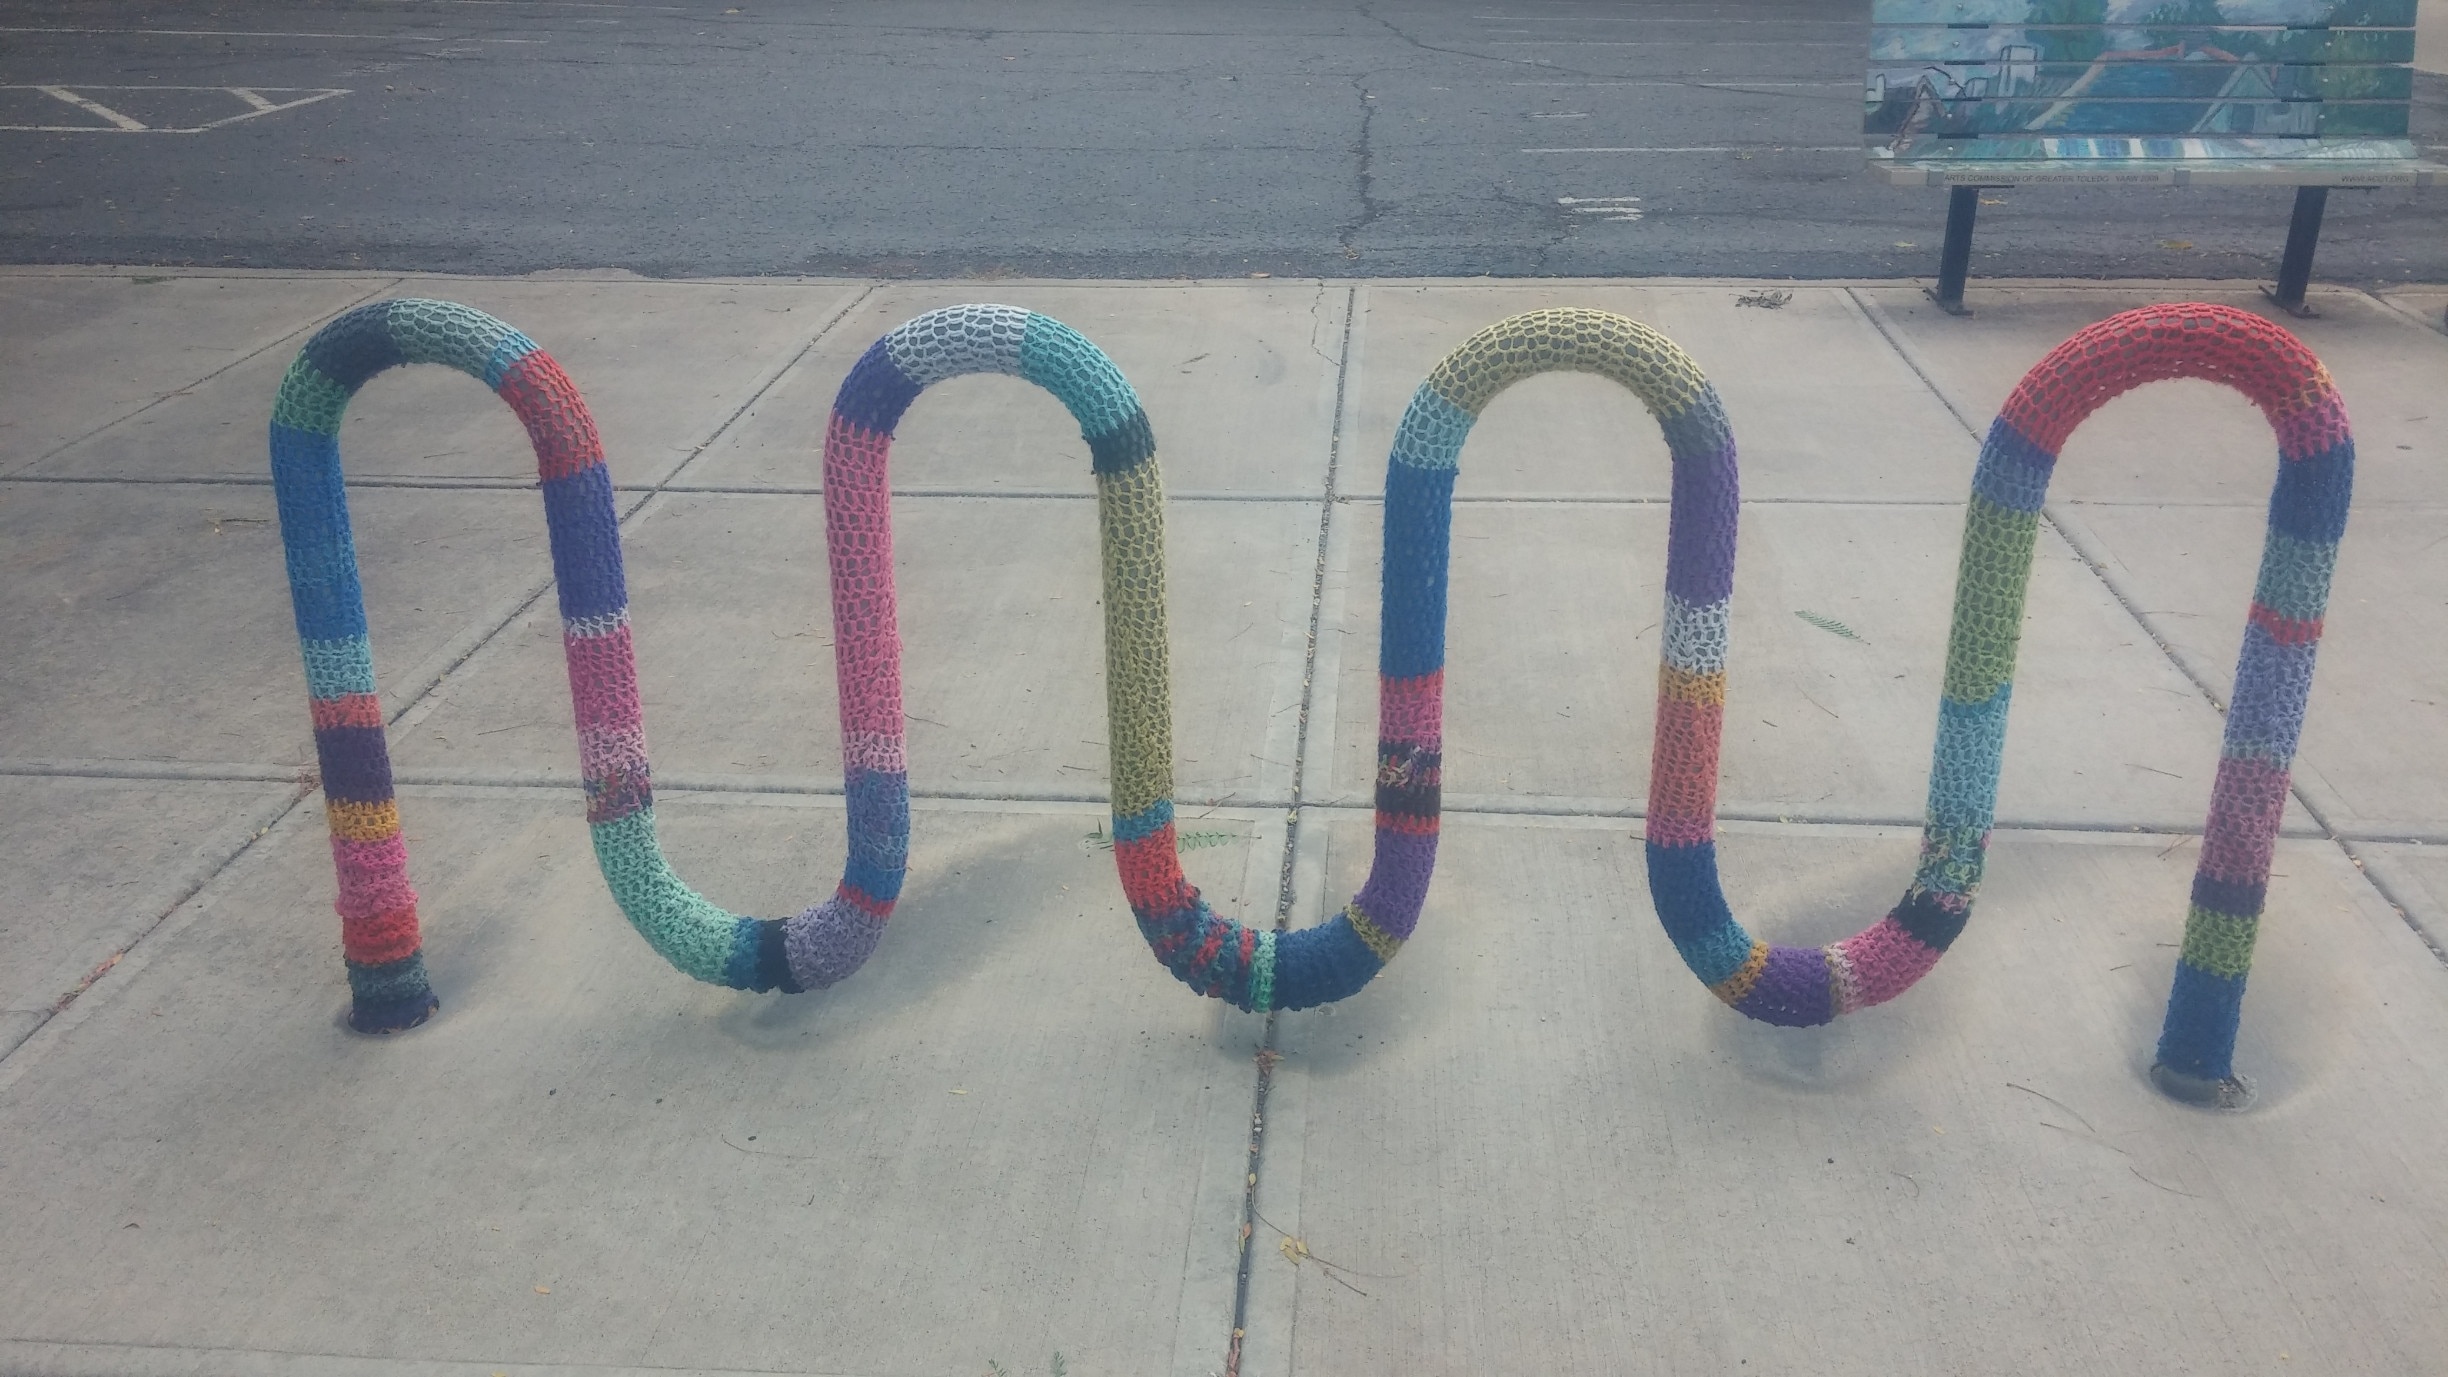 An innocent bike rack is the victim of a yarn-bombing incident. What can be done to curtail such reckless creativity and artistic expression?! 

#YarnBomb